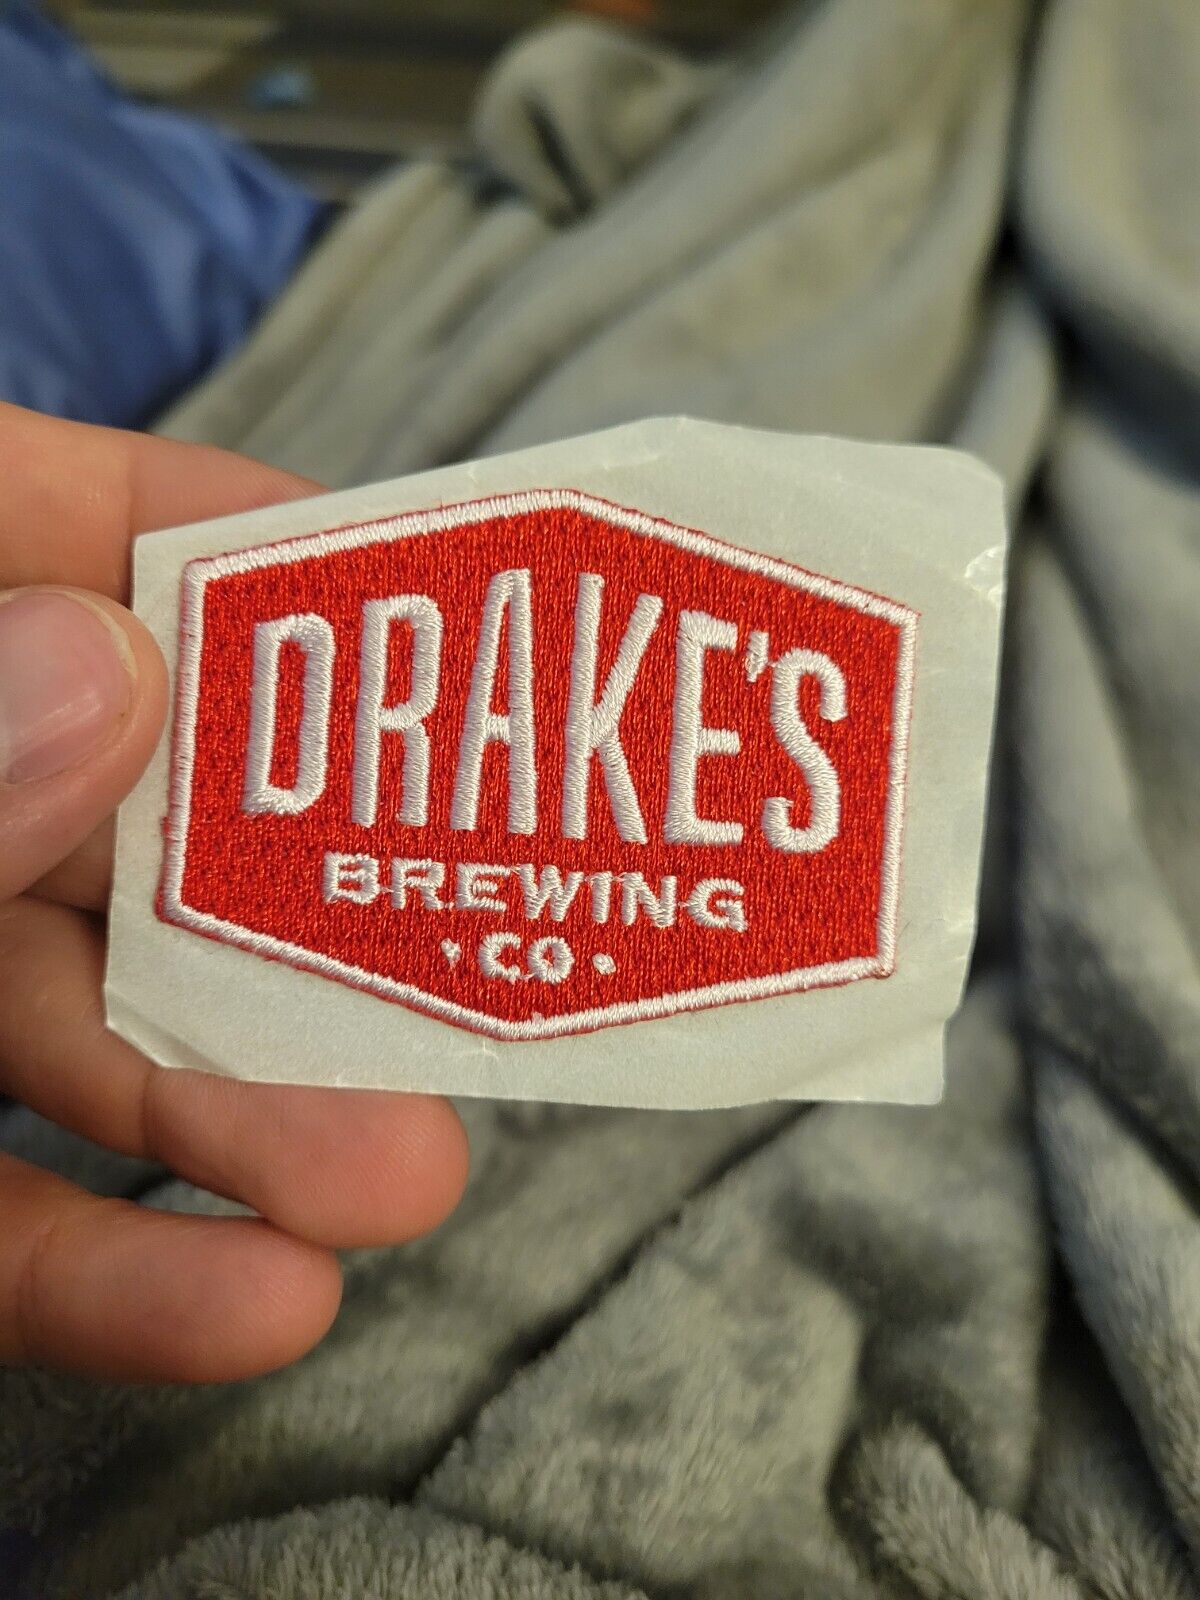 NEW Drakes Brewing Co Advertising Cloth Patch